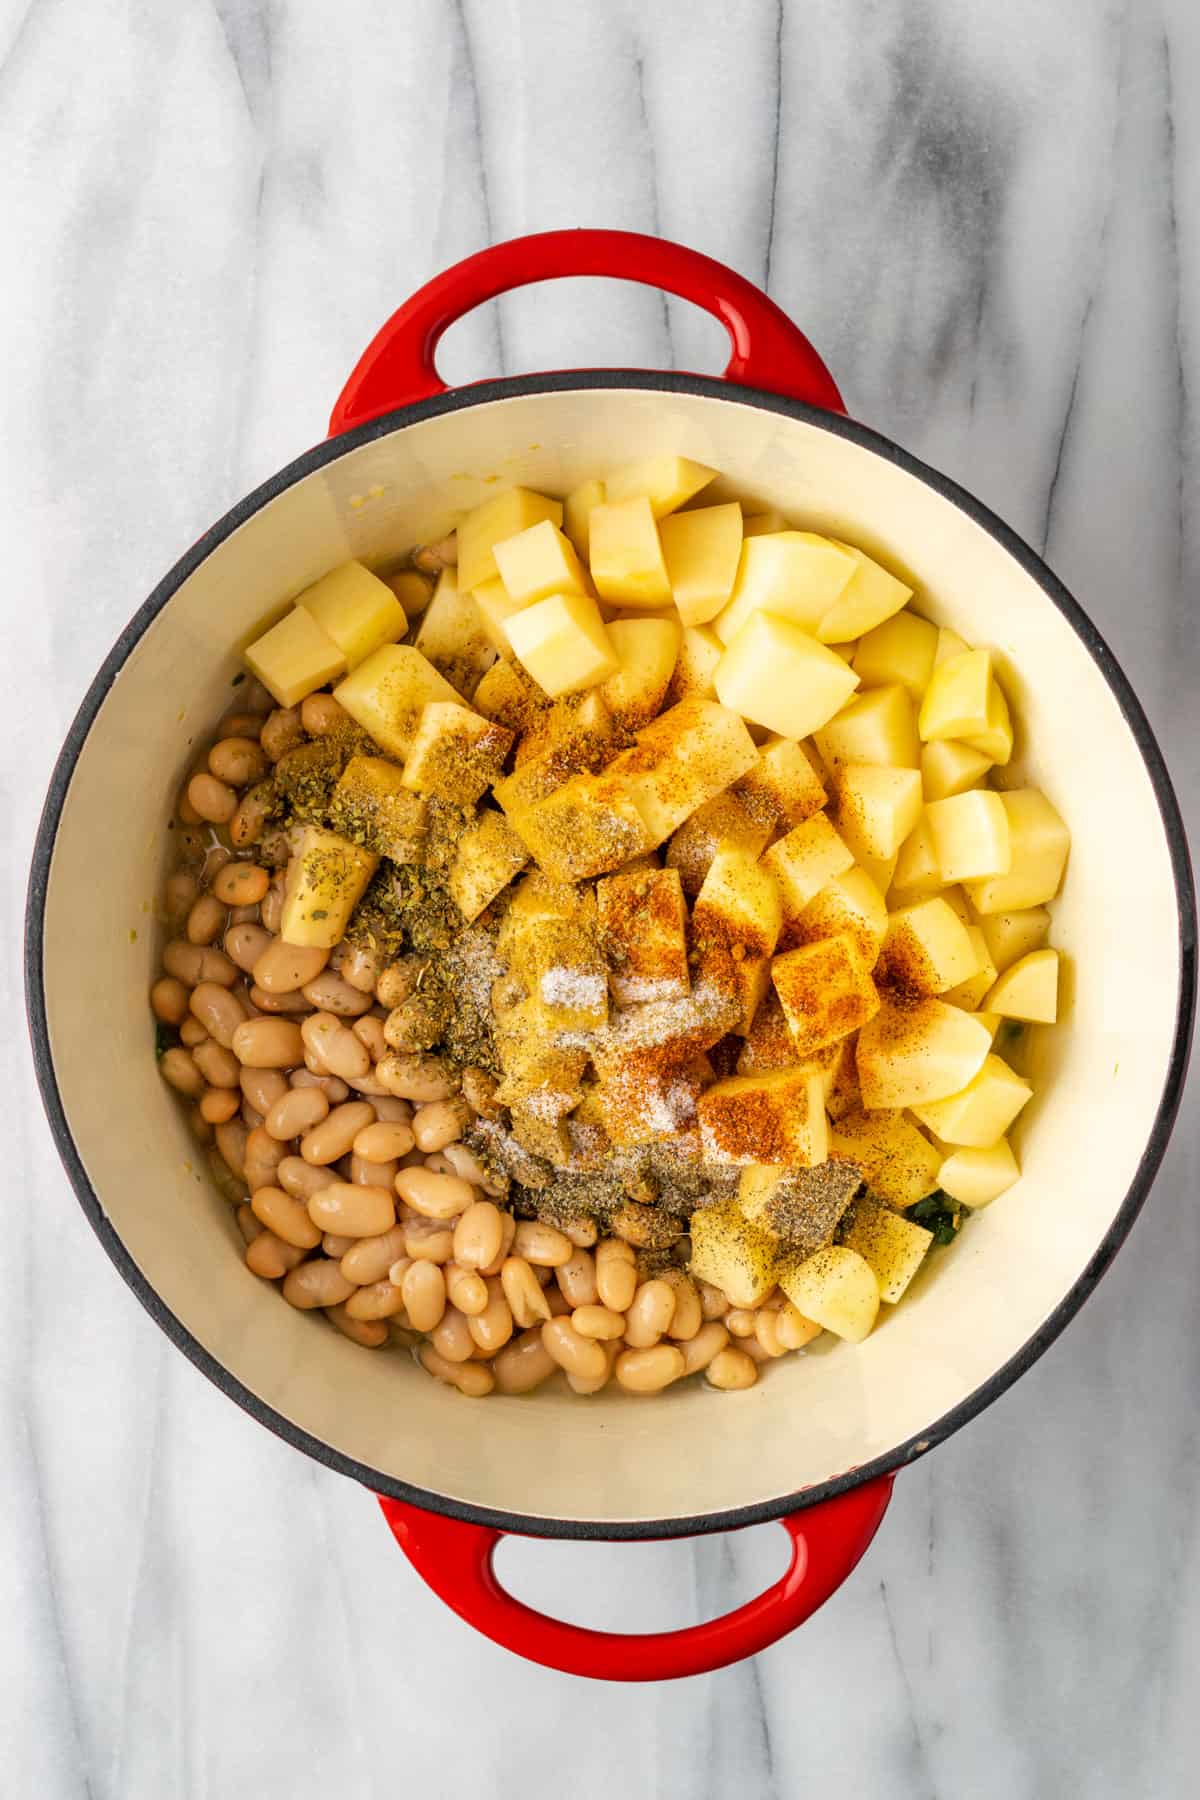 Beans, potatoes and seasoning added to sauteed vegetables in a dutch oven pot.